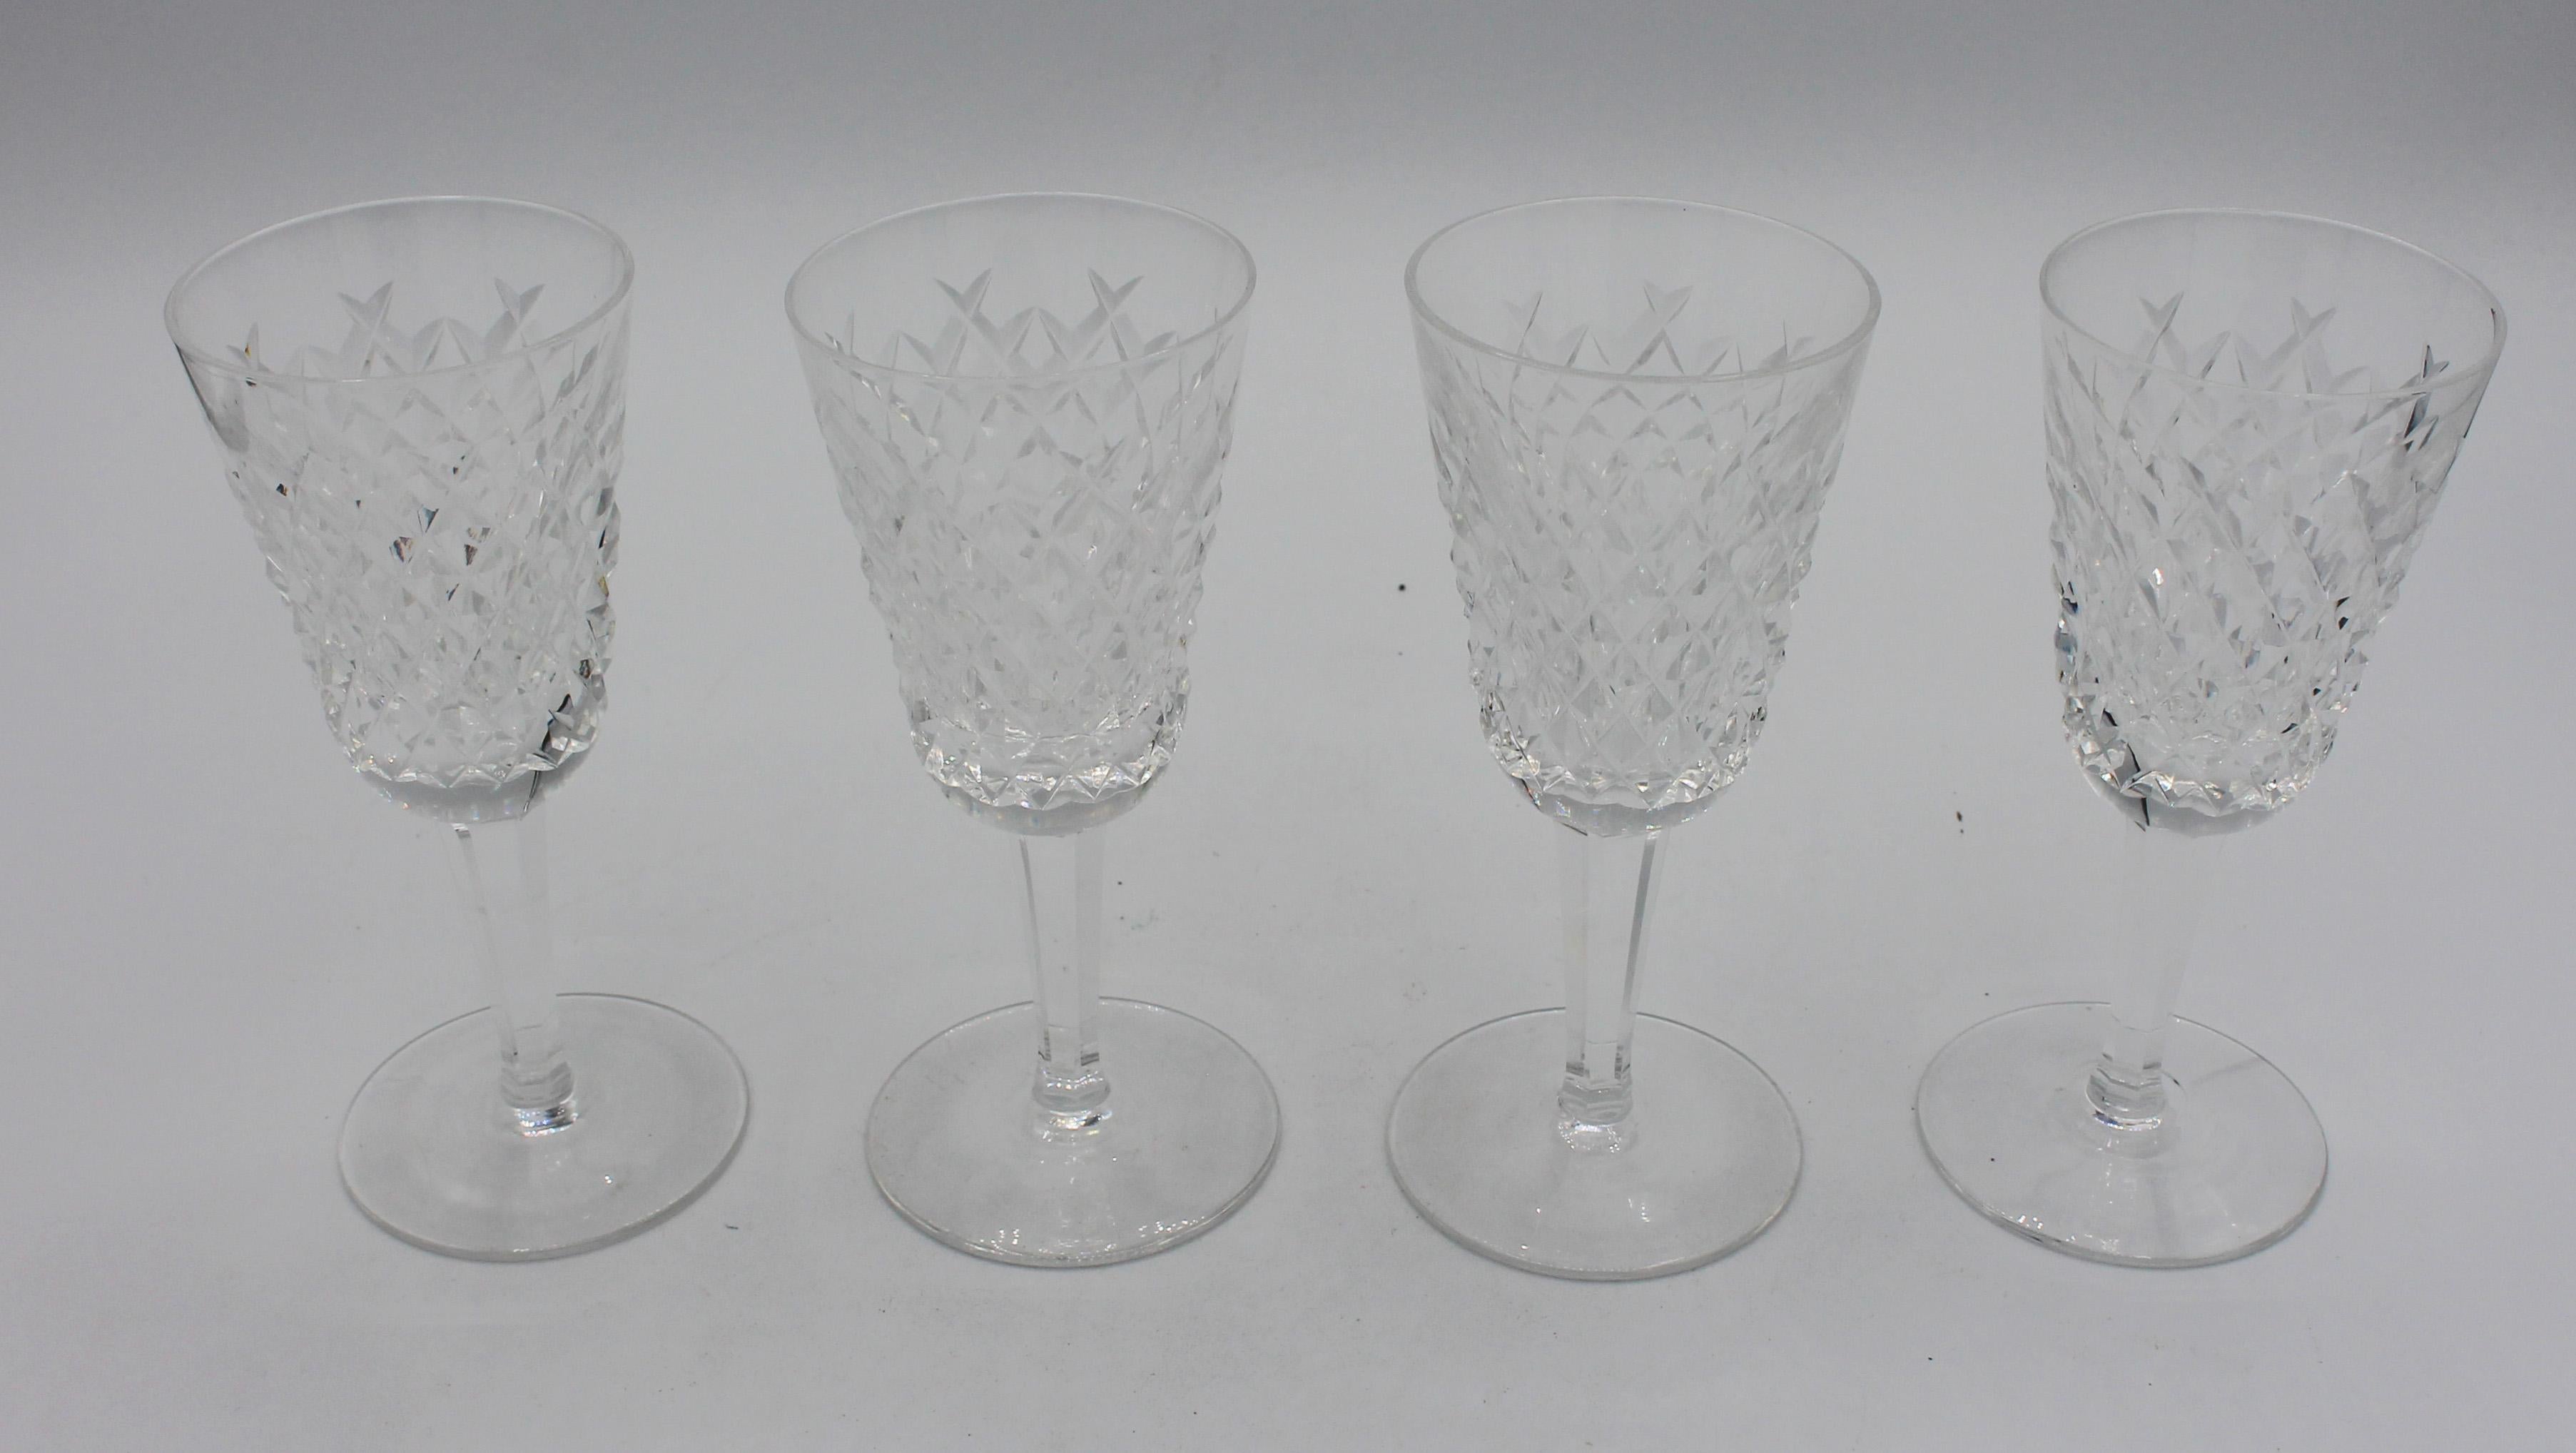 Vintage set of 4 Alana by Waterford sherry glasses. Handblown & cut. Measures: height 5 1/8